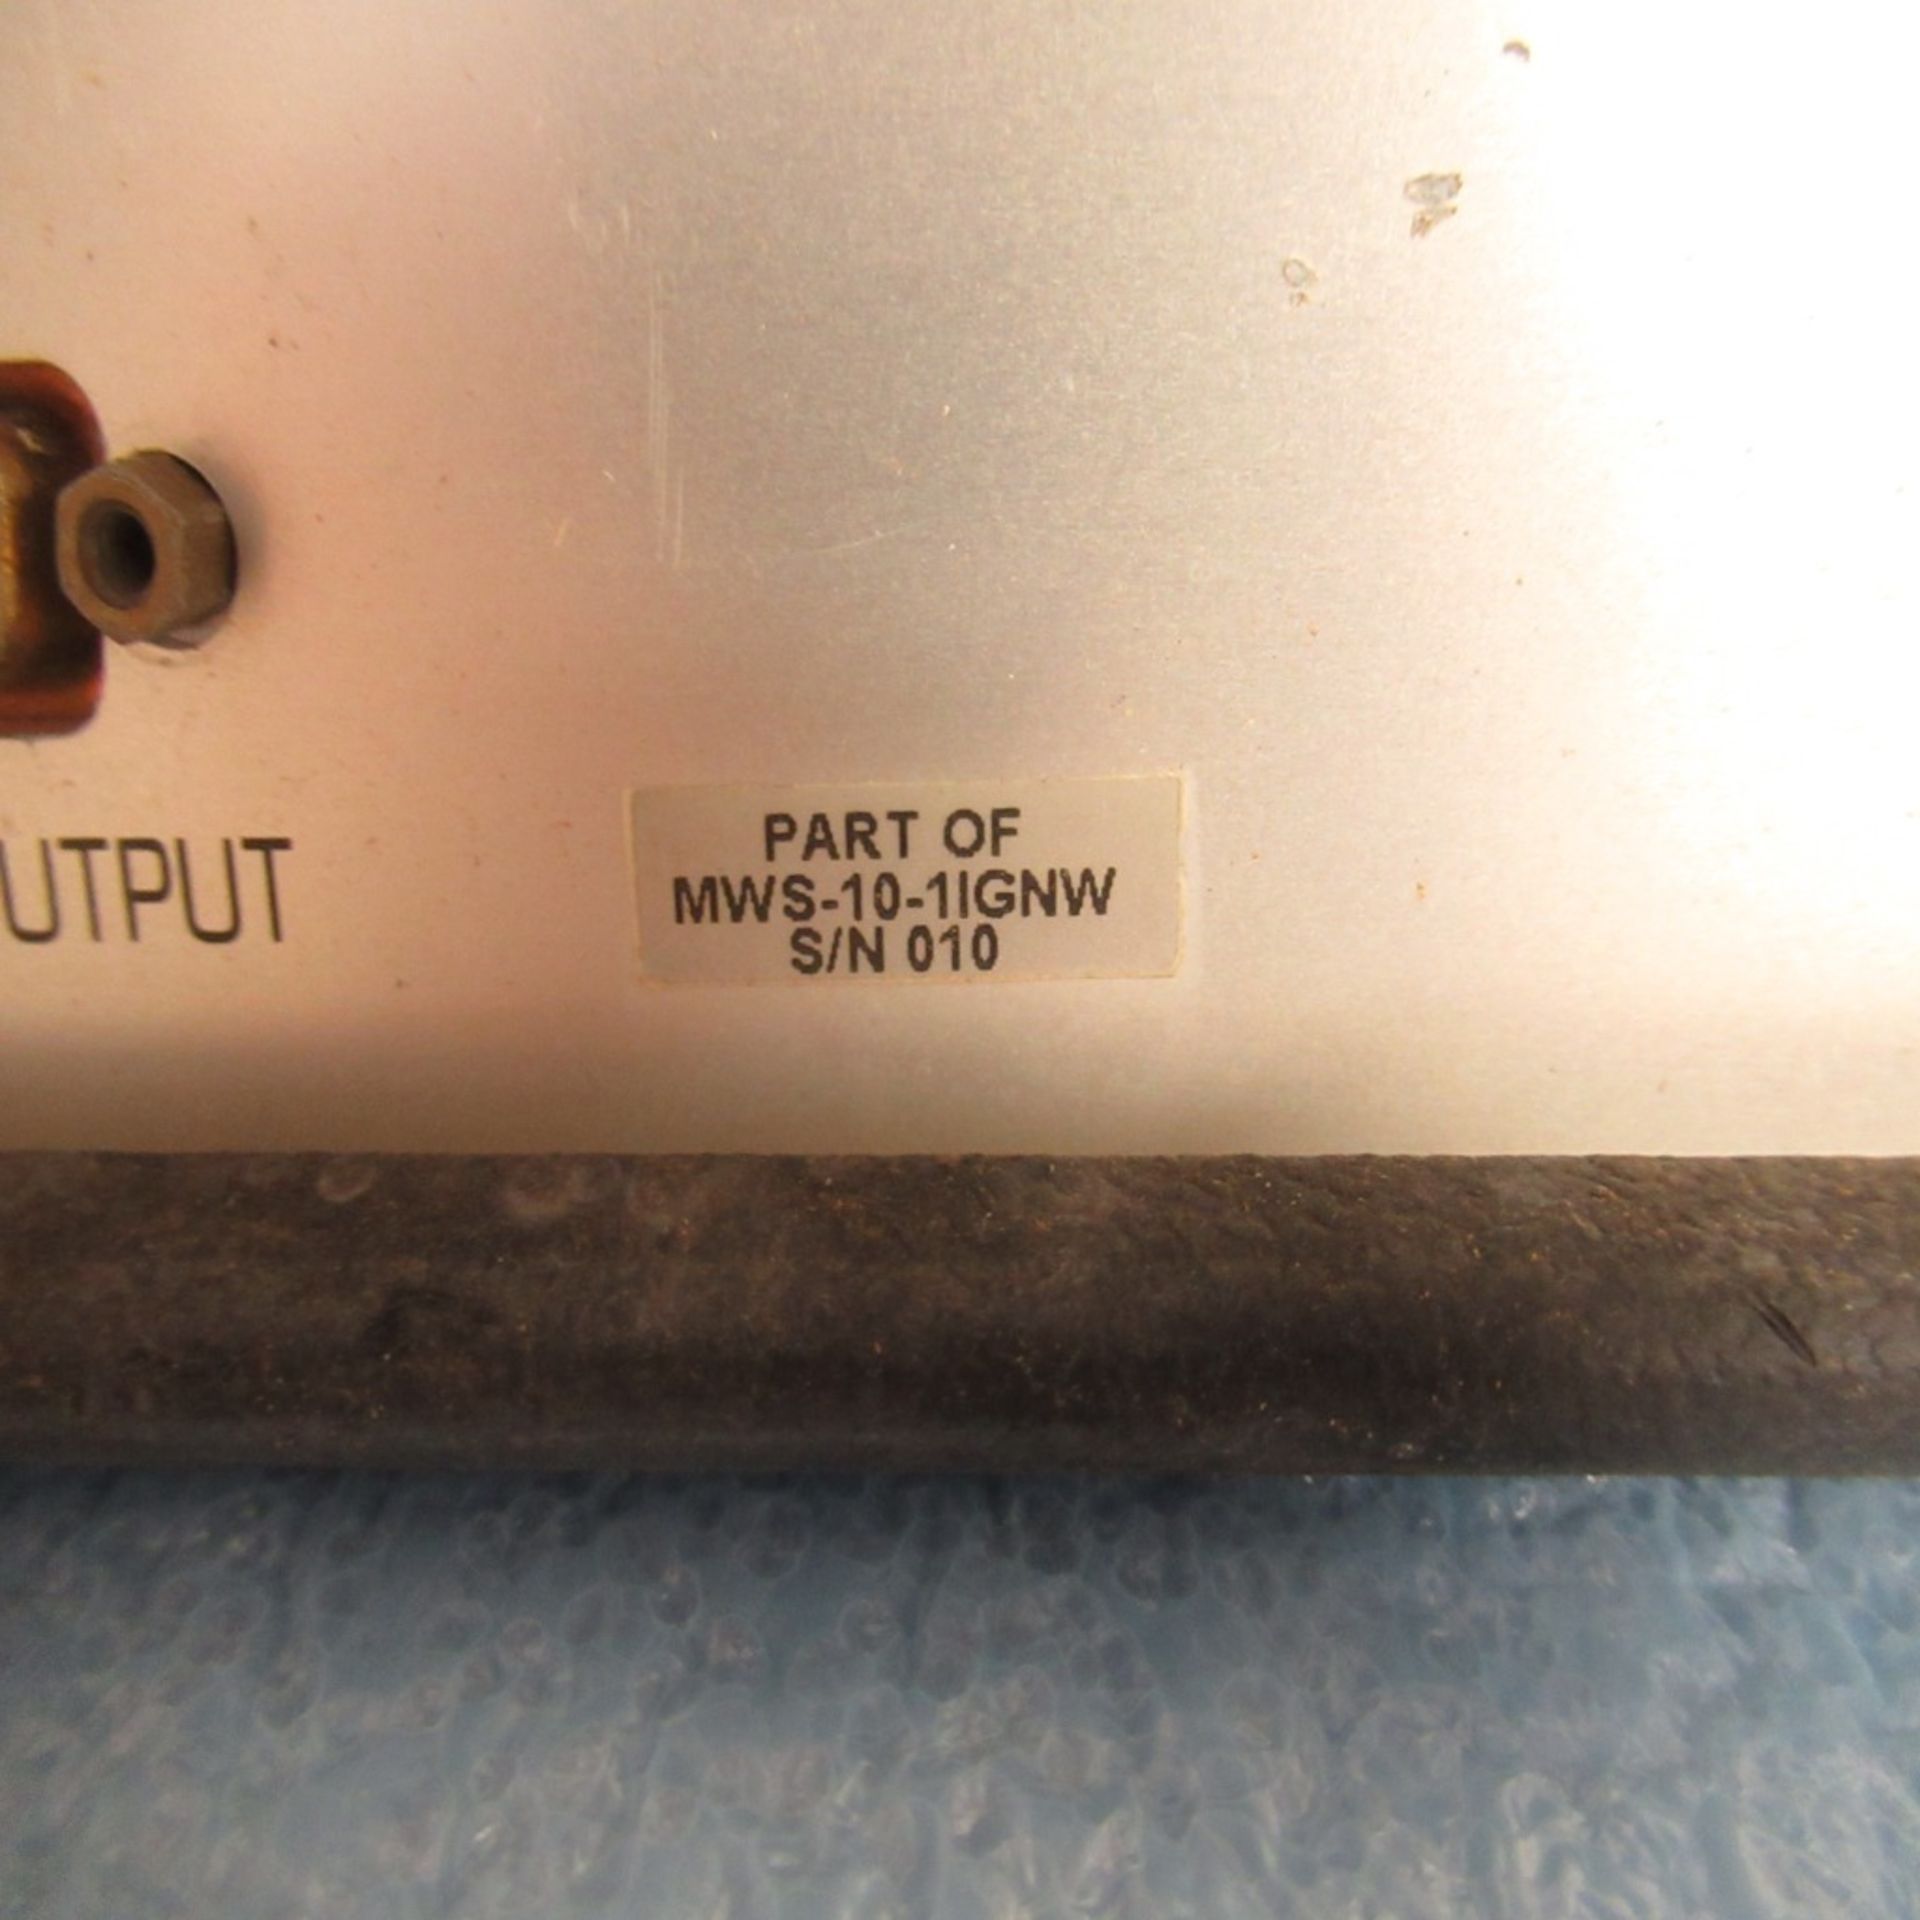 PHOTON SNAP SHOT MODEL 6000 *POWERS ON* NO SCREEN DISPLAY; FARNELL AP20-80 REGULATED POWER SUPPLY * - Image 47 of 222